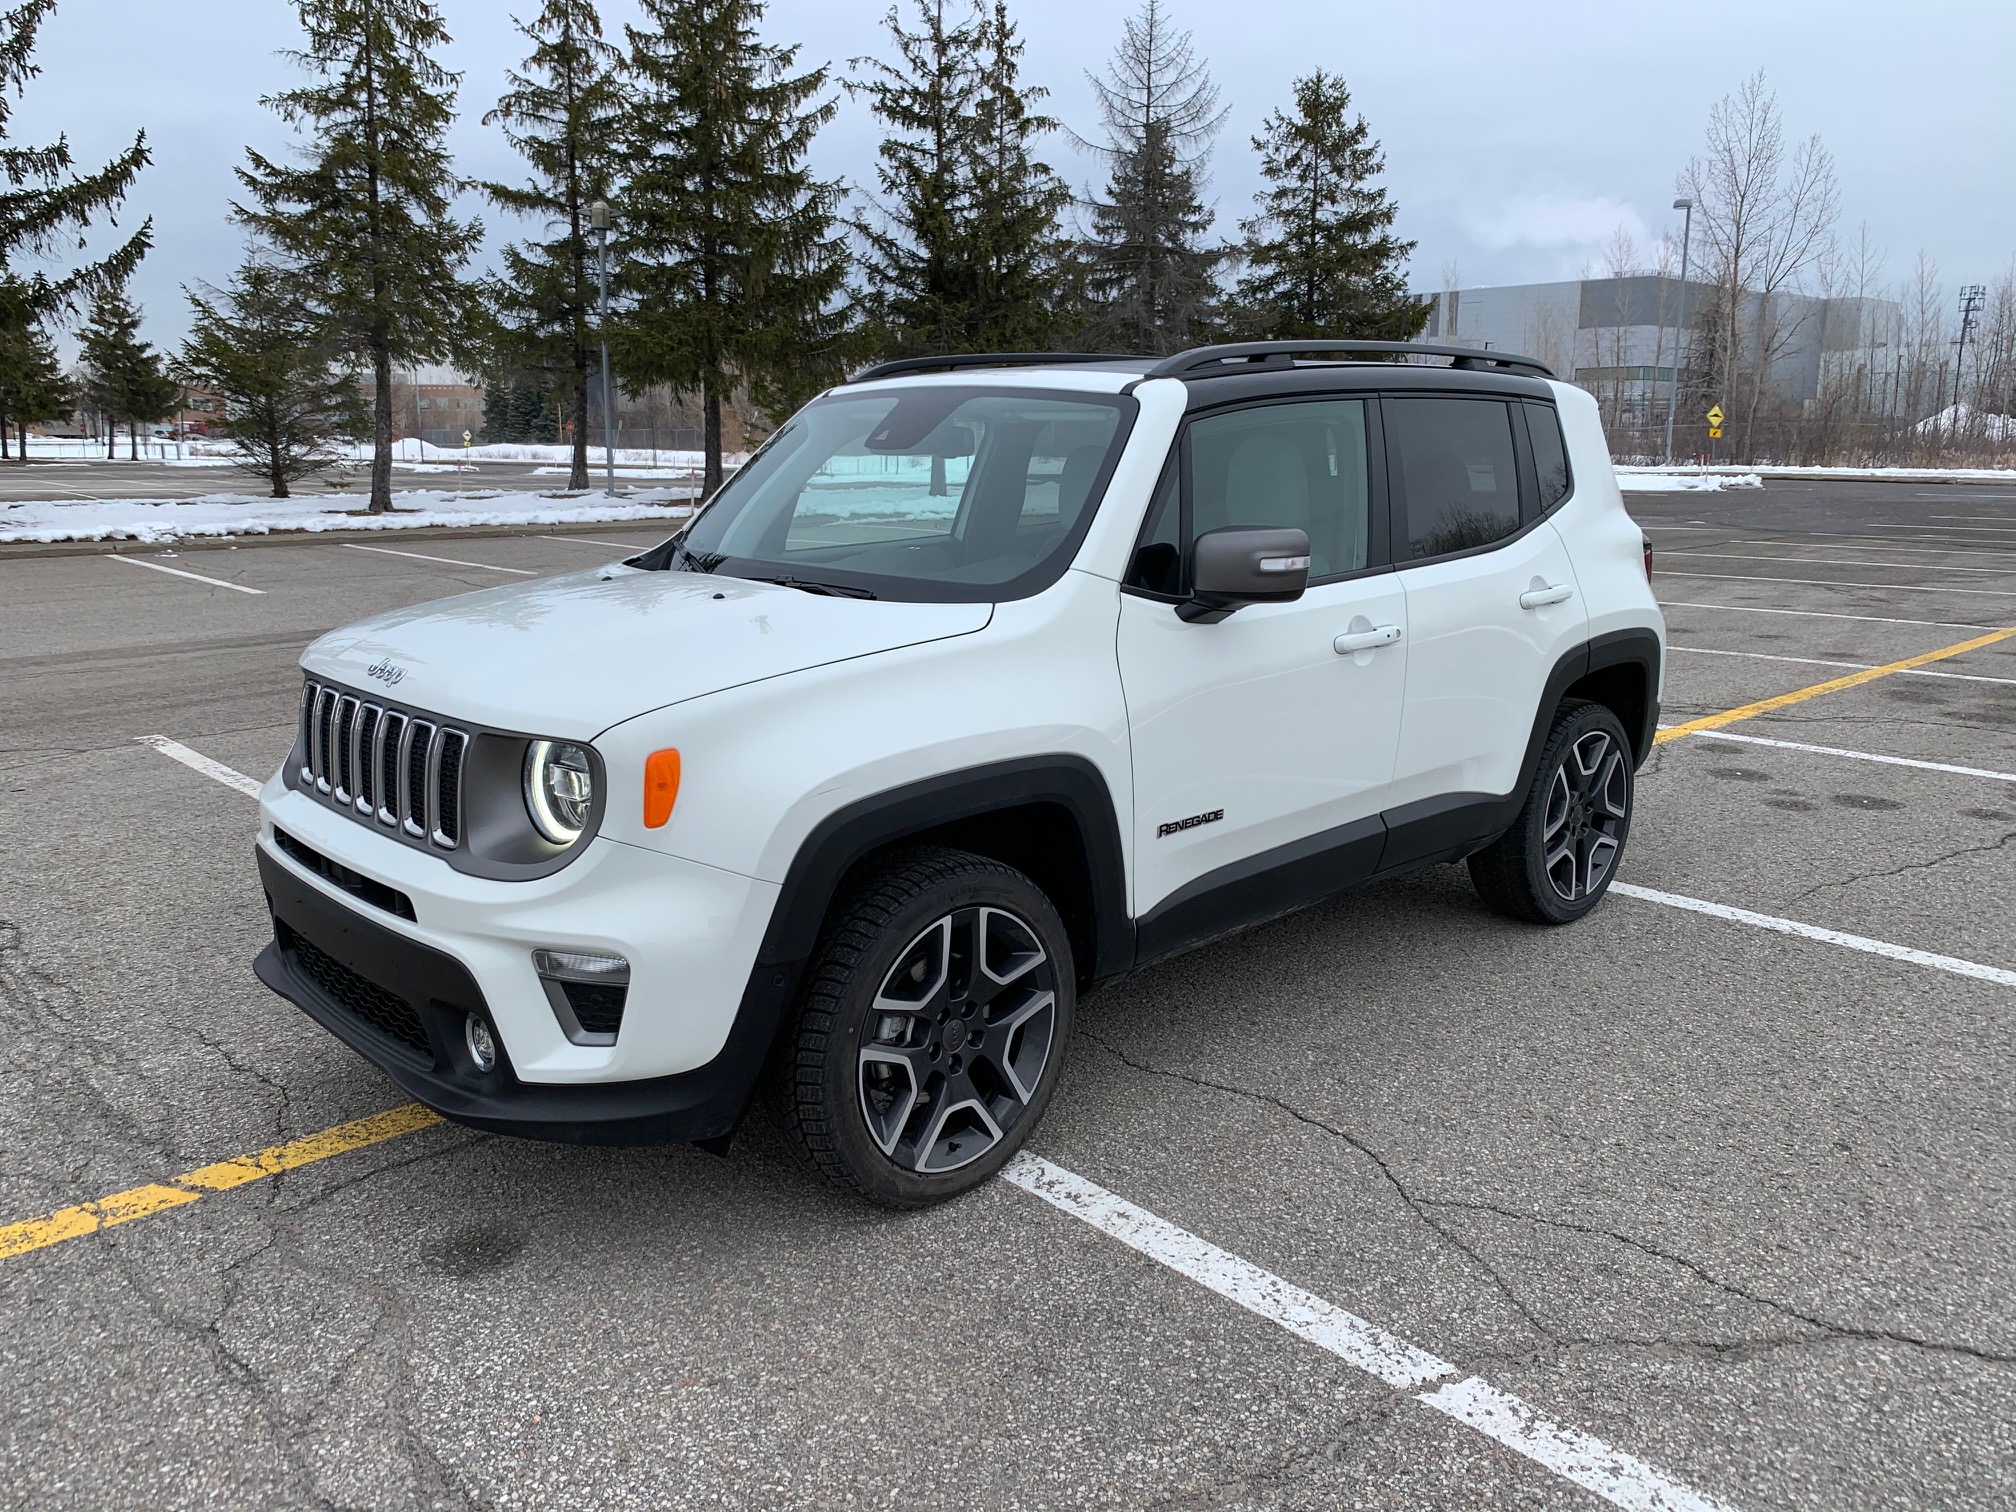 2021 Jeep Renegade Review